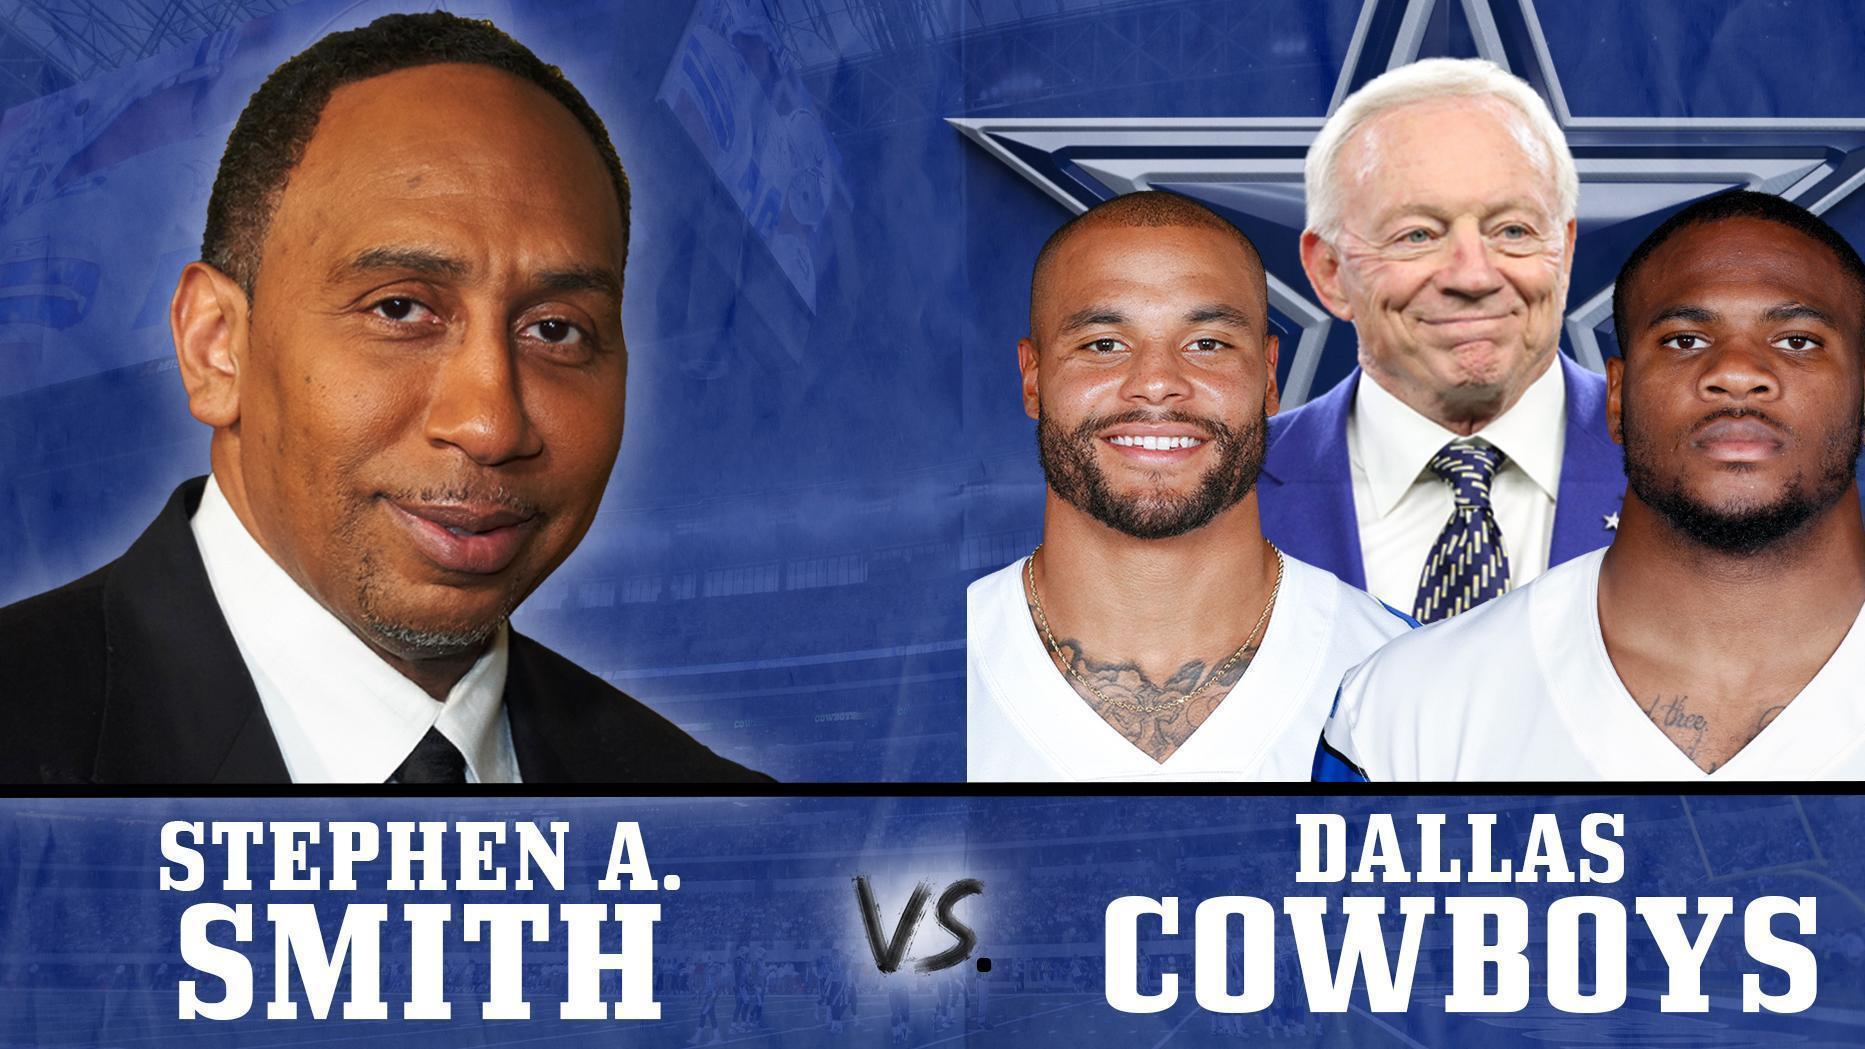 Cowboys-Bucs live stream (9/9): How to watch Dallas-Tampa Bay